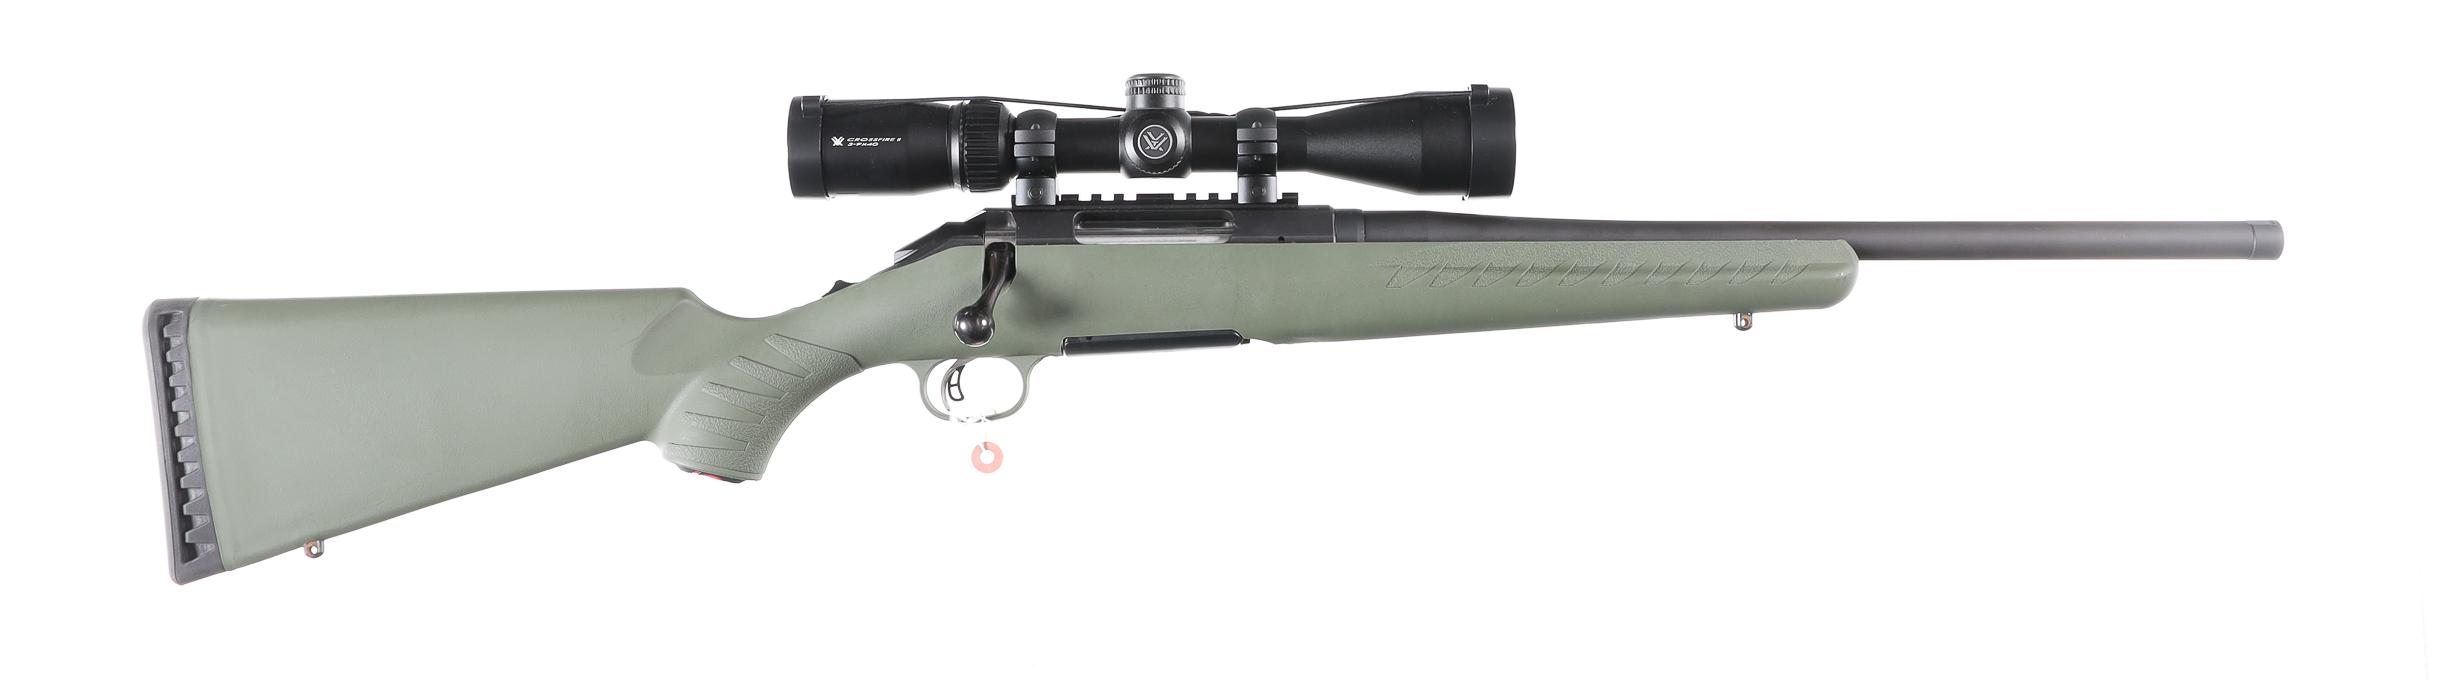 Ruger American Bolt Rifle .308 win